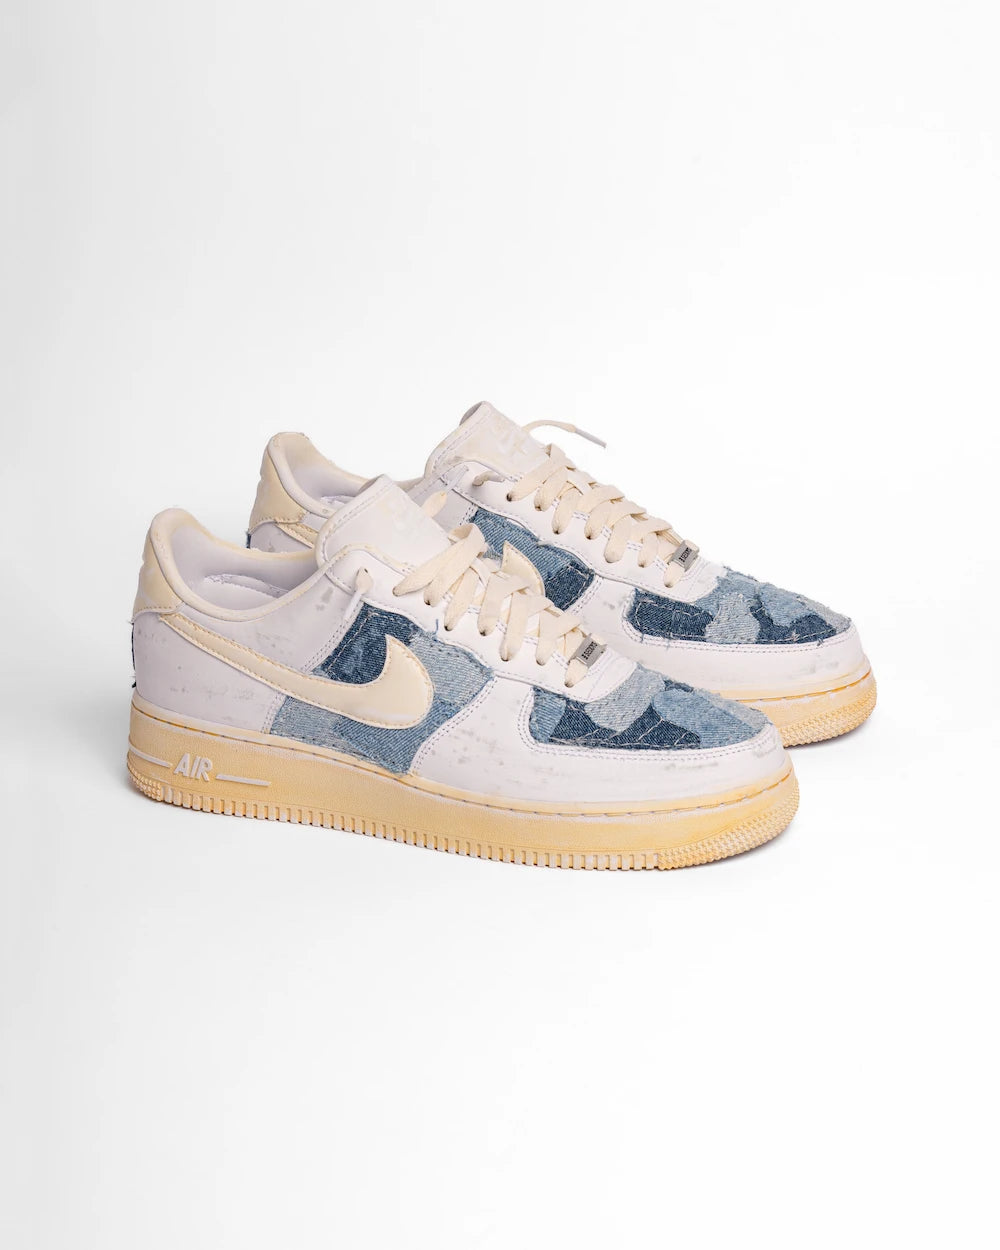 Nike Air Force 1 custom con jeans patchwork e base beige effetto vintage